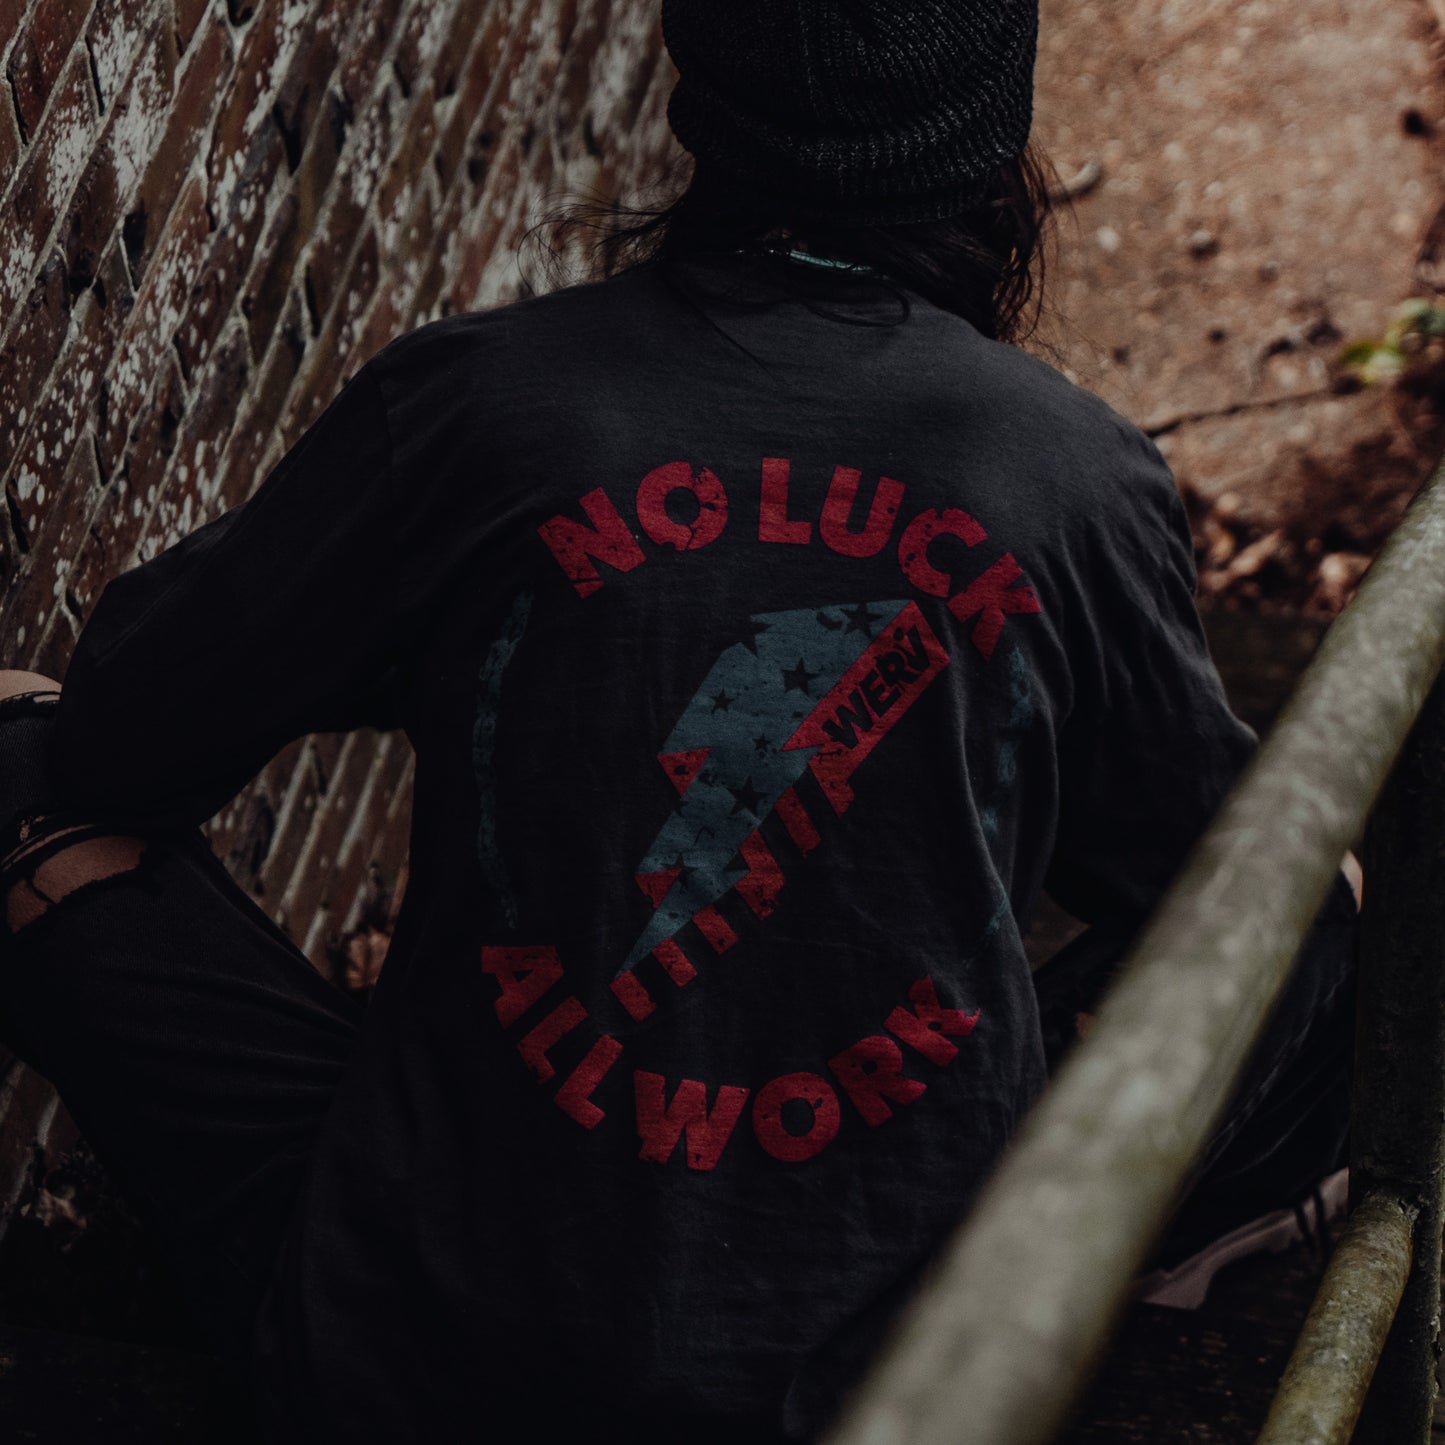 "No Luck, All Work" Vintage Long Sleeve